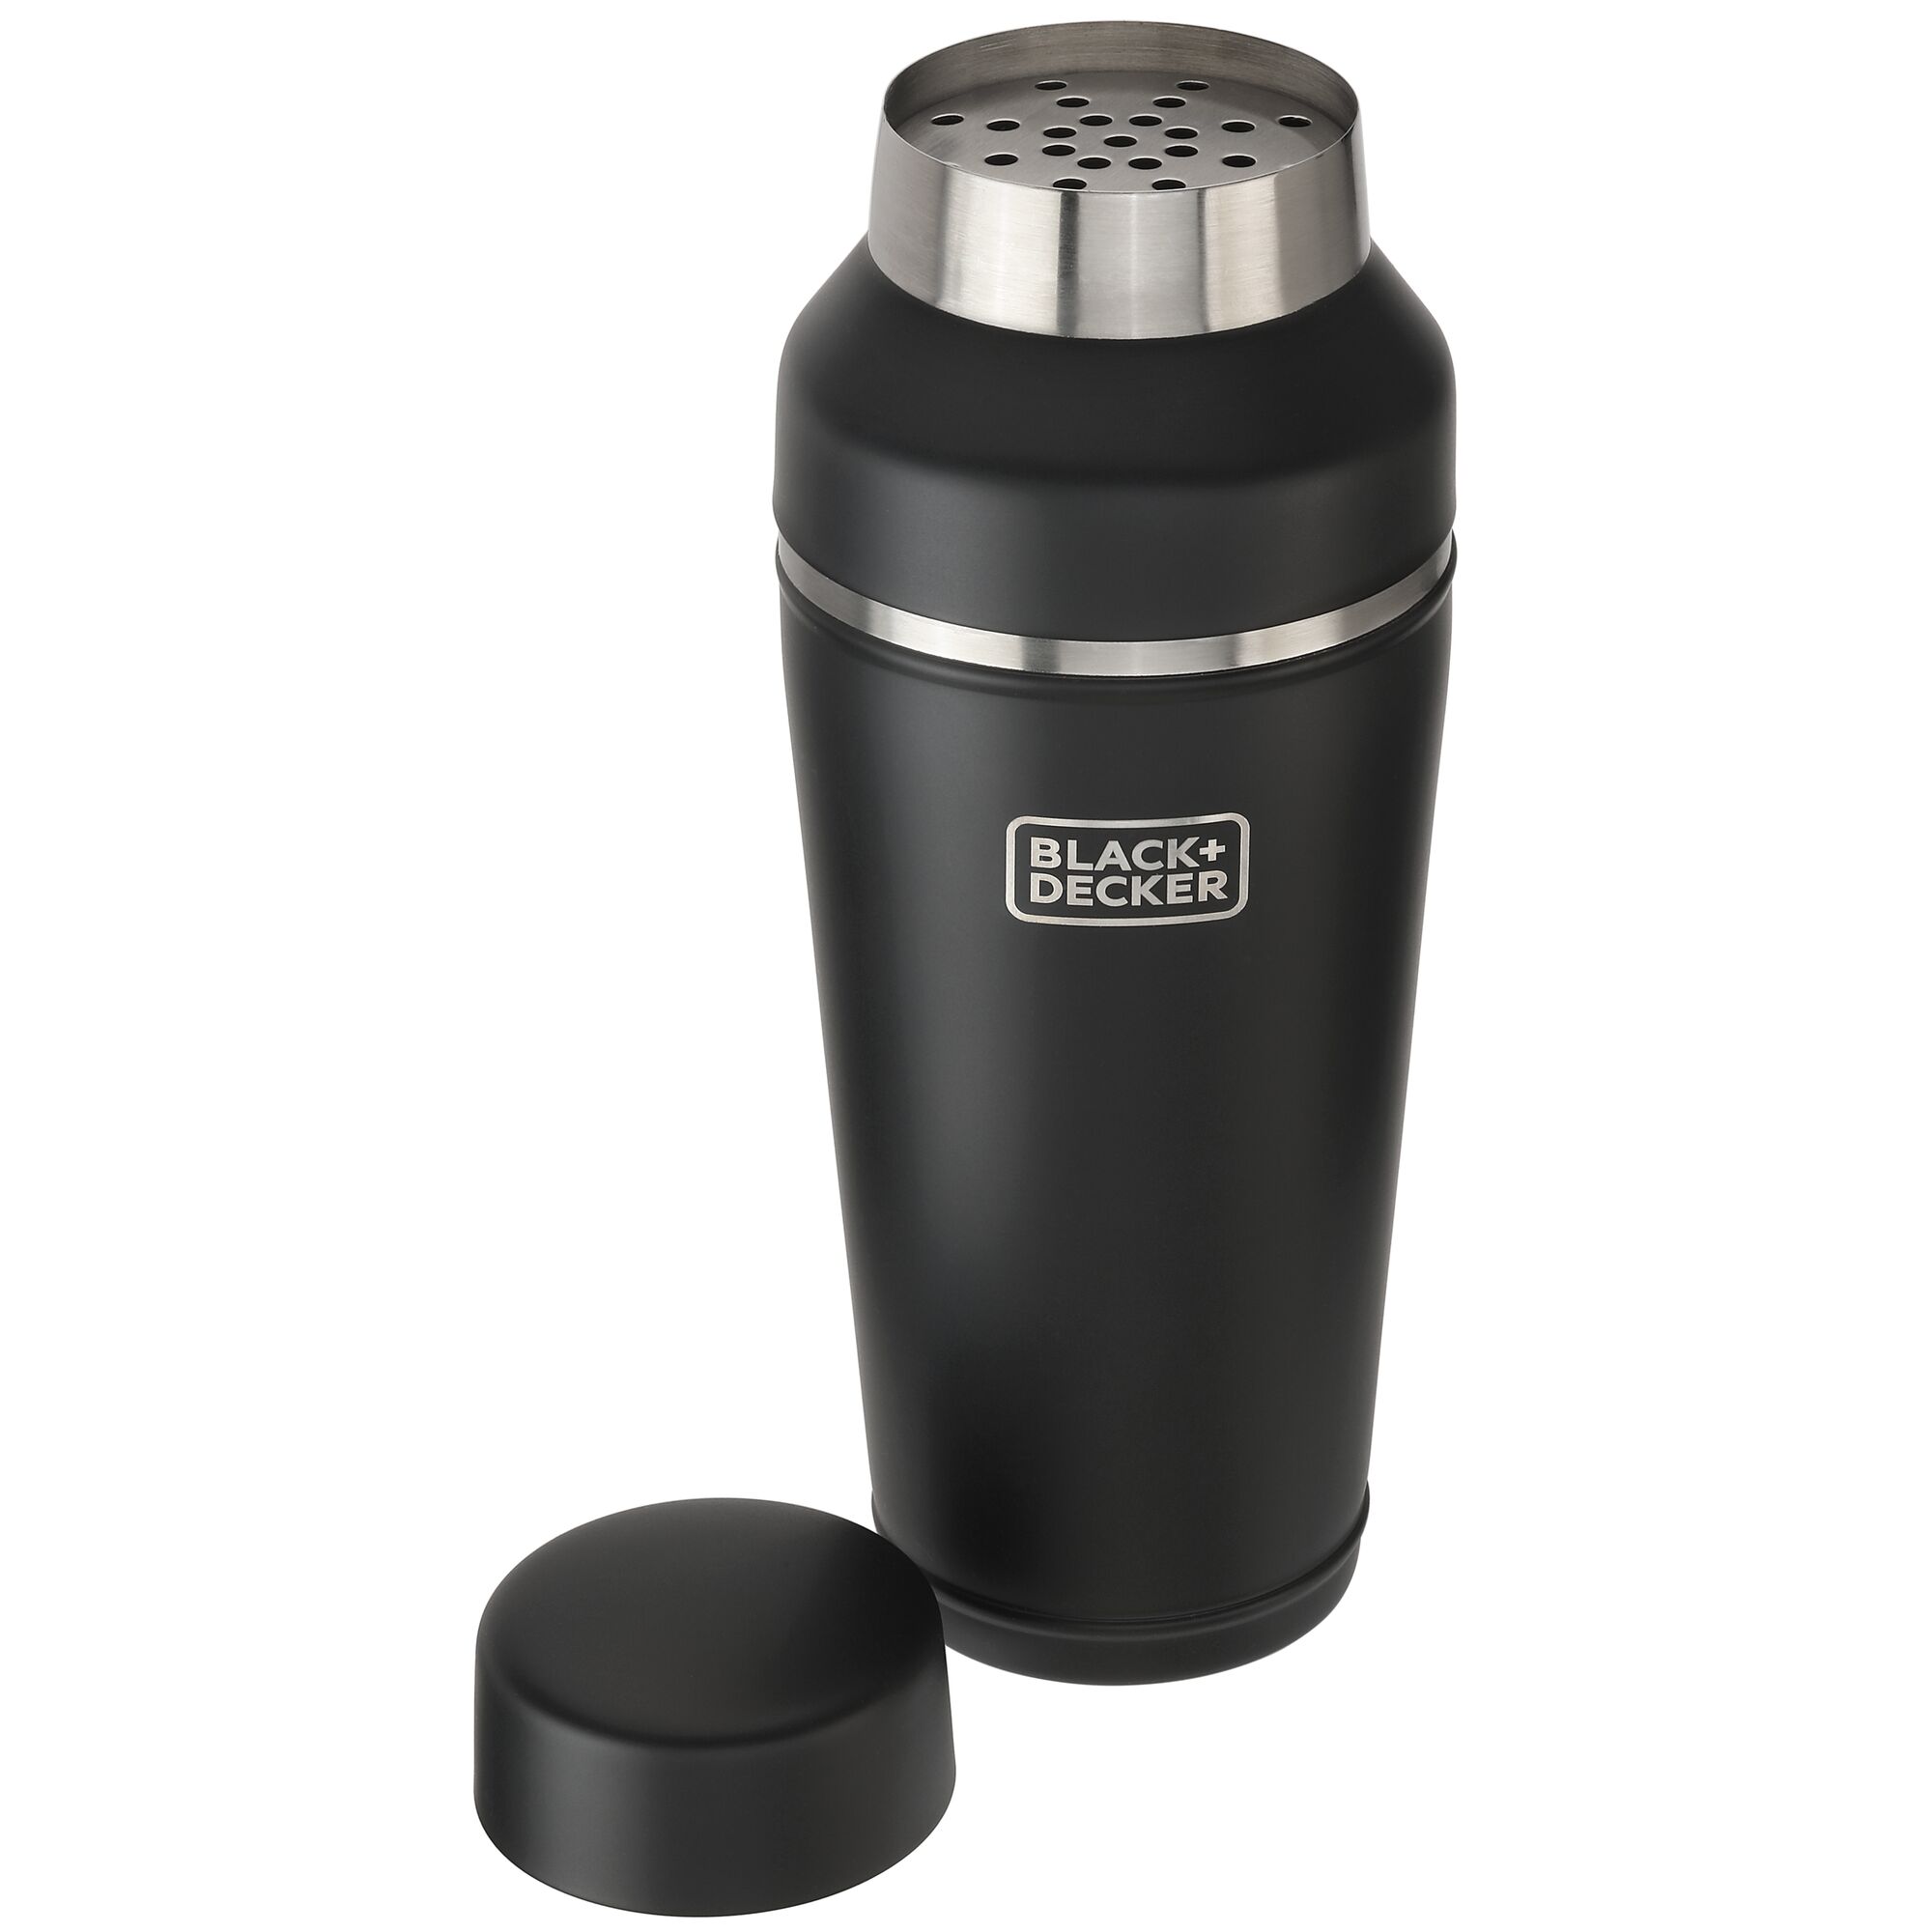 front view of BLACK+DECKER matte black and stainless cocktail shaker with cap off so strainer is visible